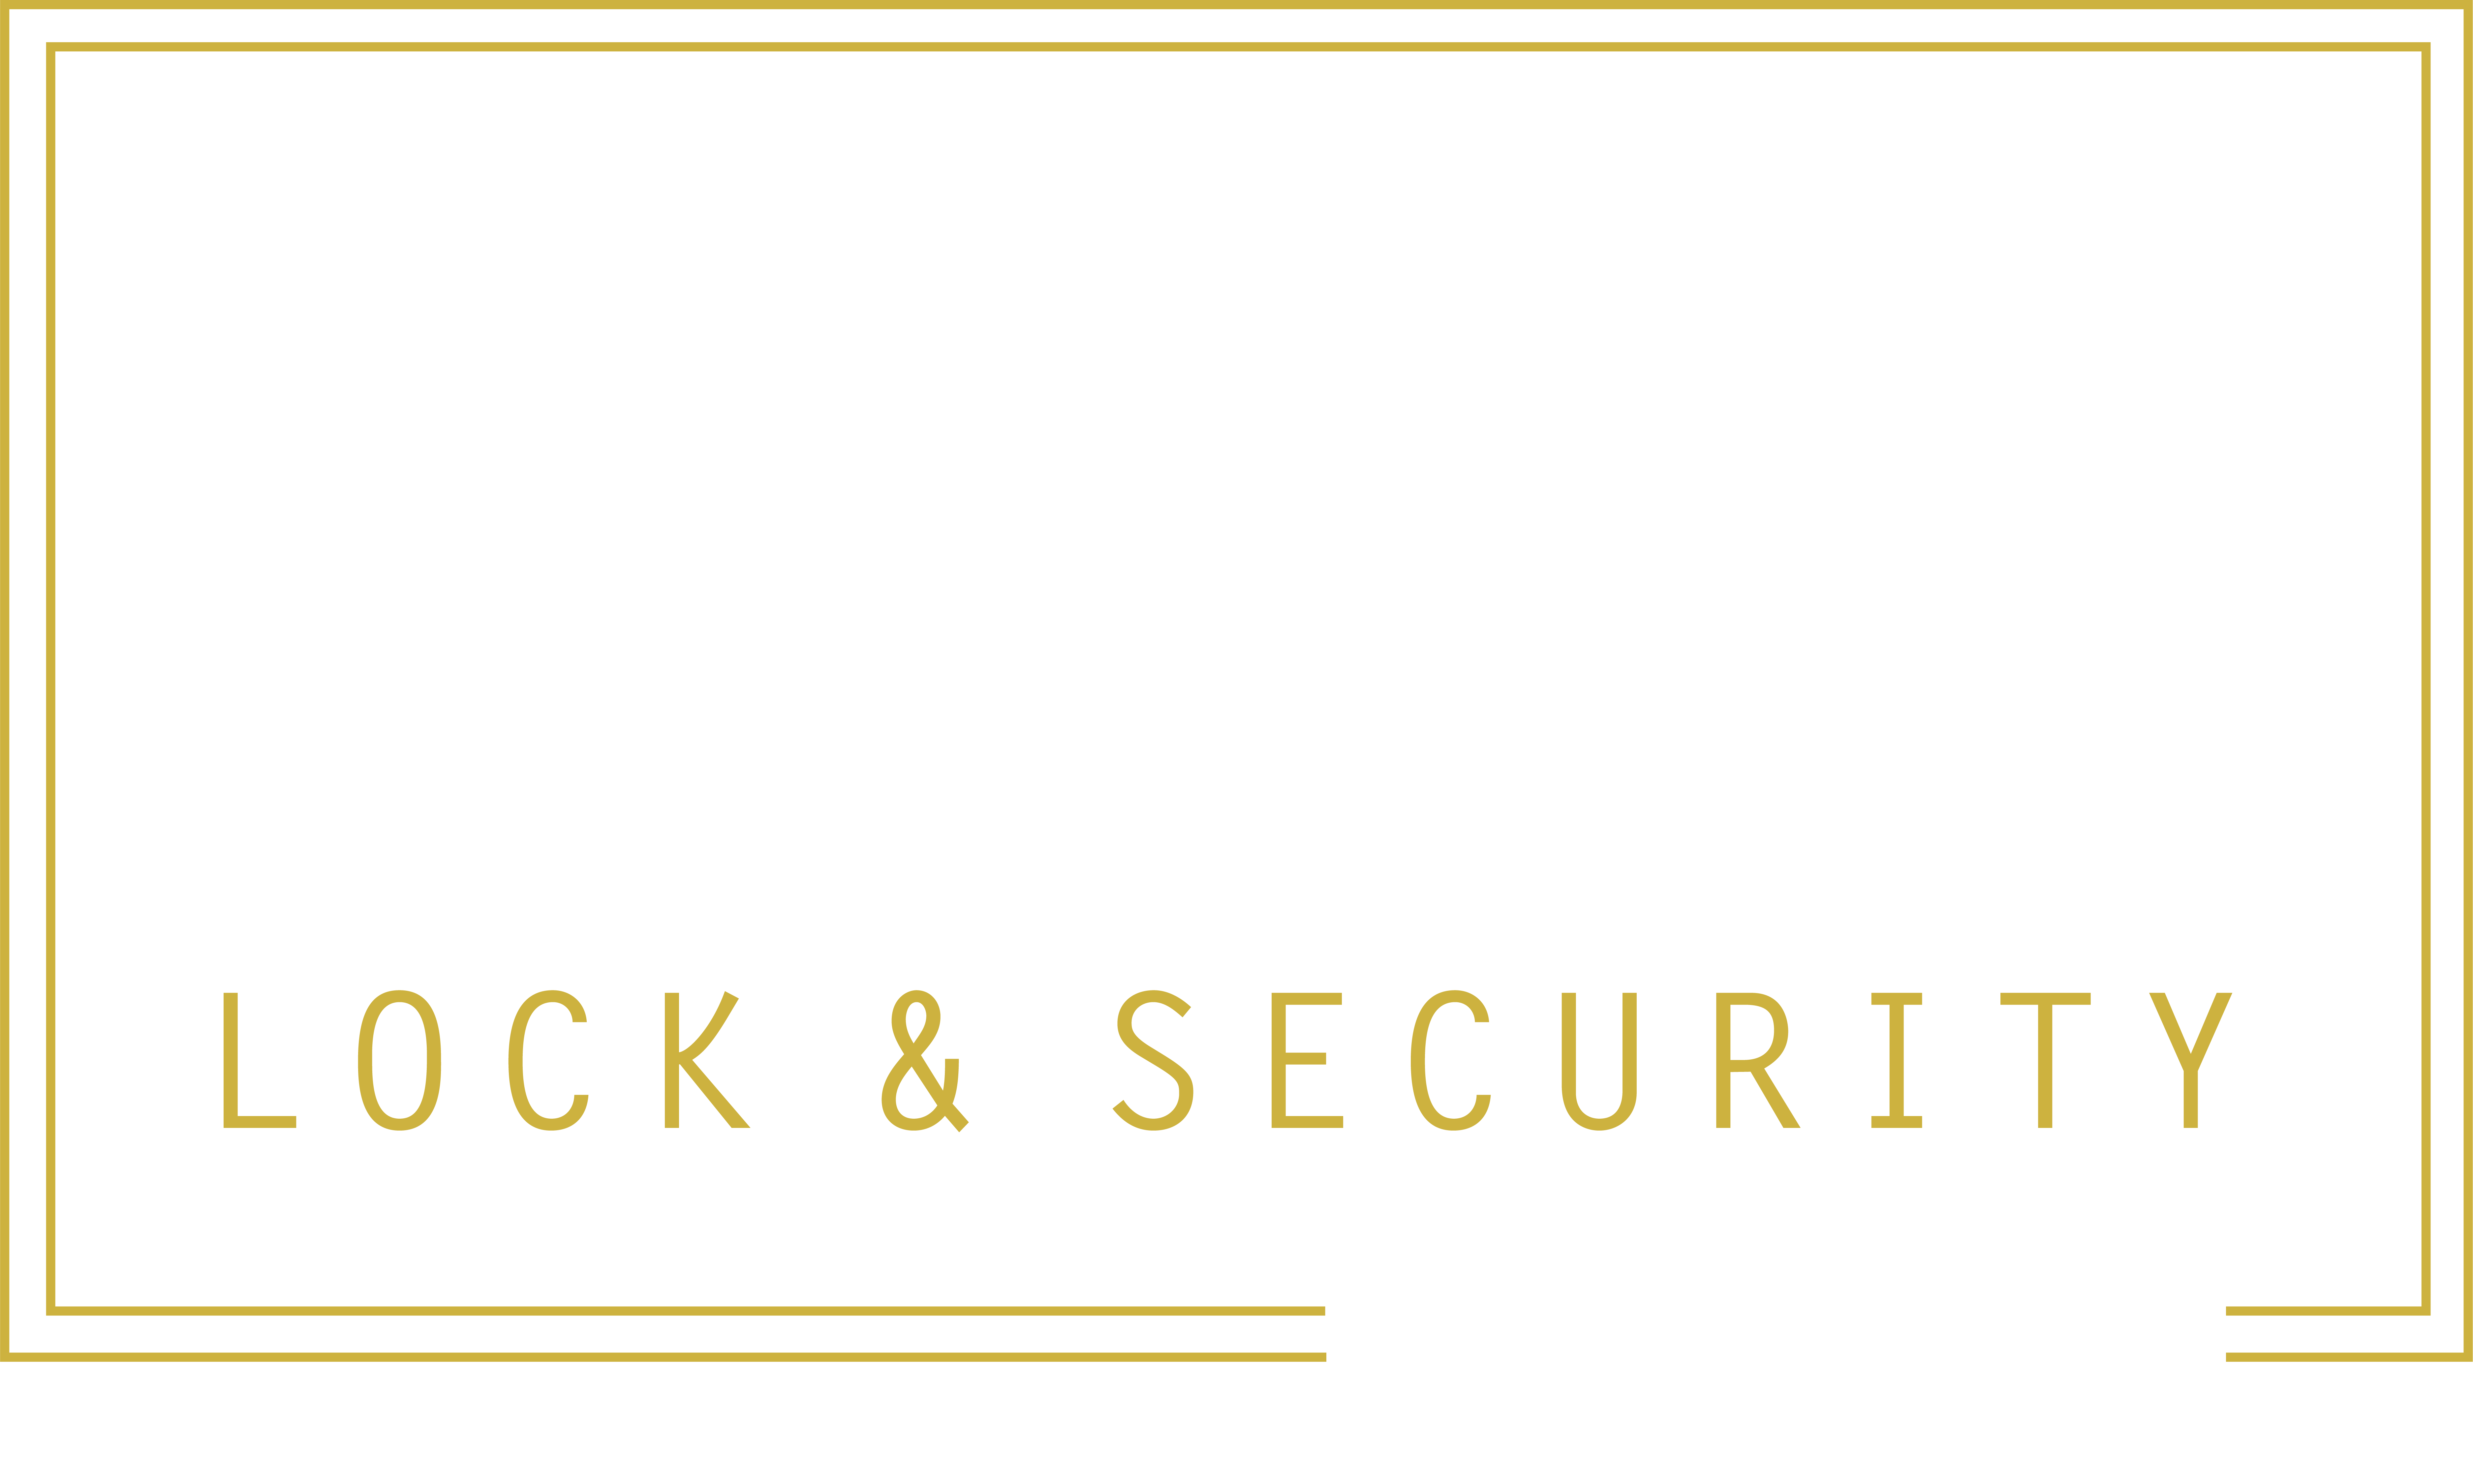 levis's lock and security